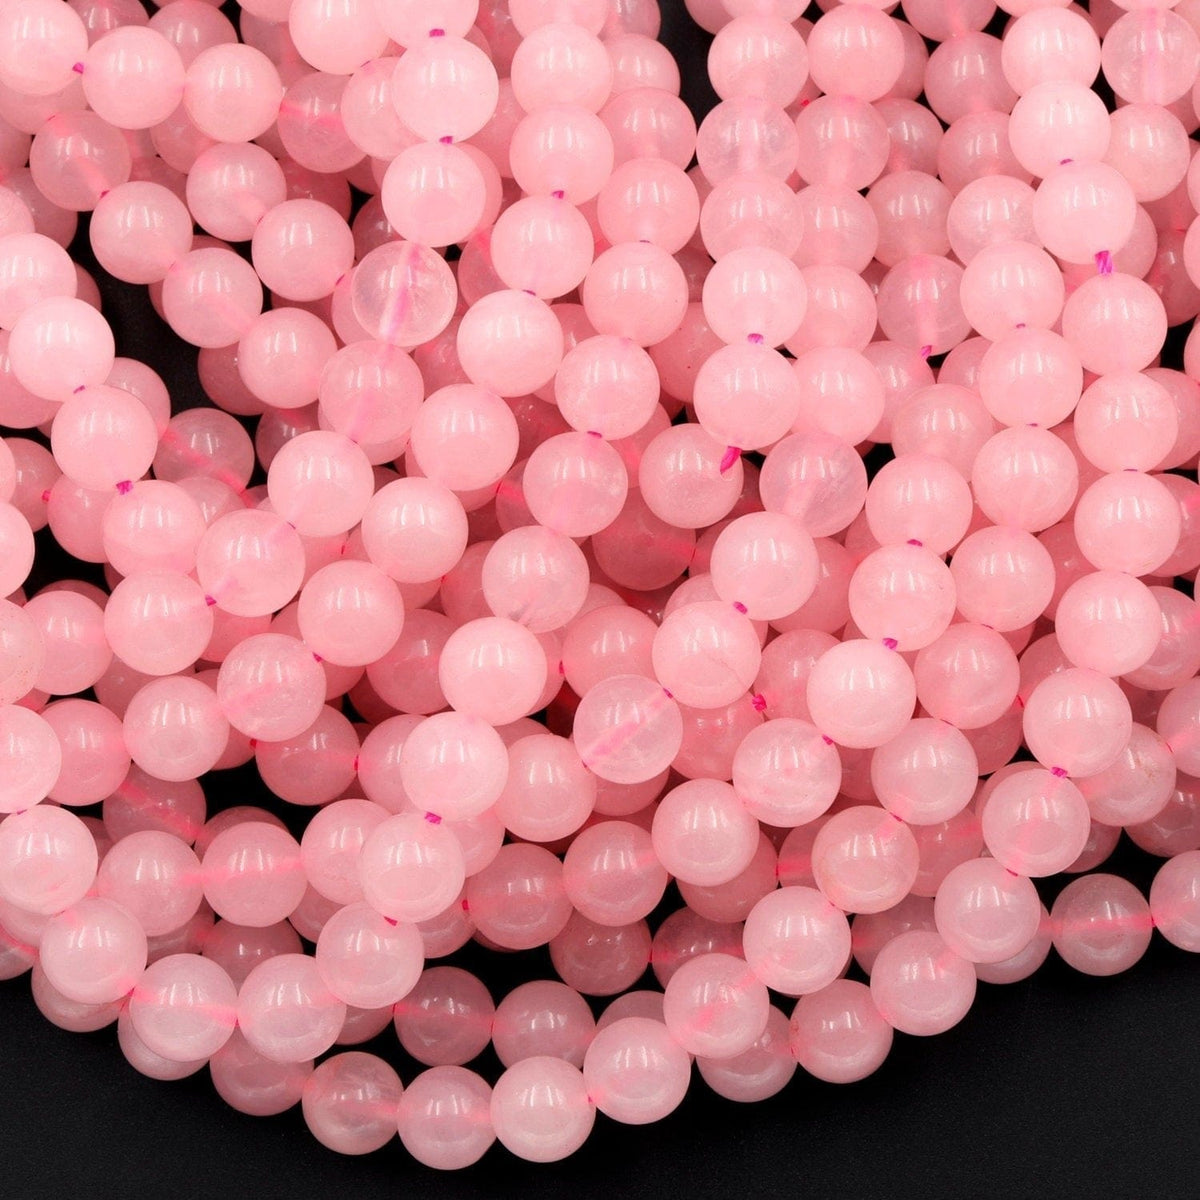 Natural Rose Quartz Stone Beads Pink Round Faced Matte Gemstone Loose Beads  for Jewelry Making 2MM 3MM 4MM 6MM 8MM 10MM 12MM (8MM, Rose Matte)